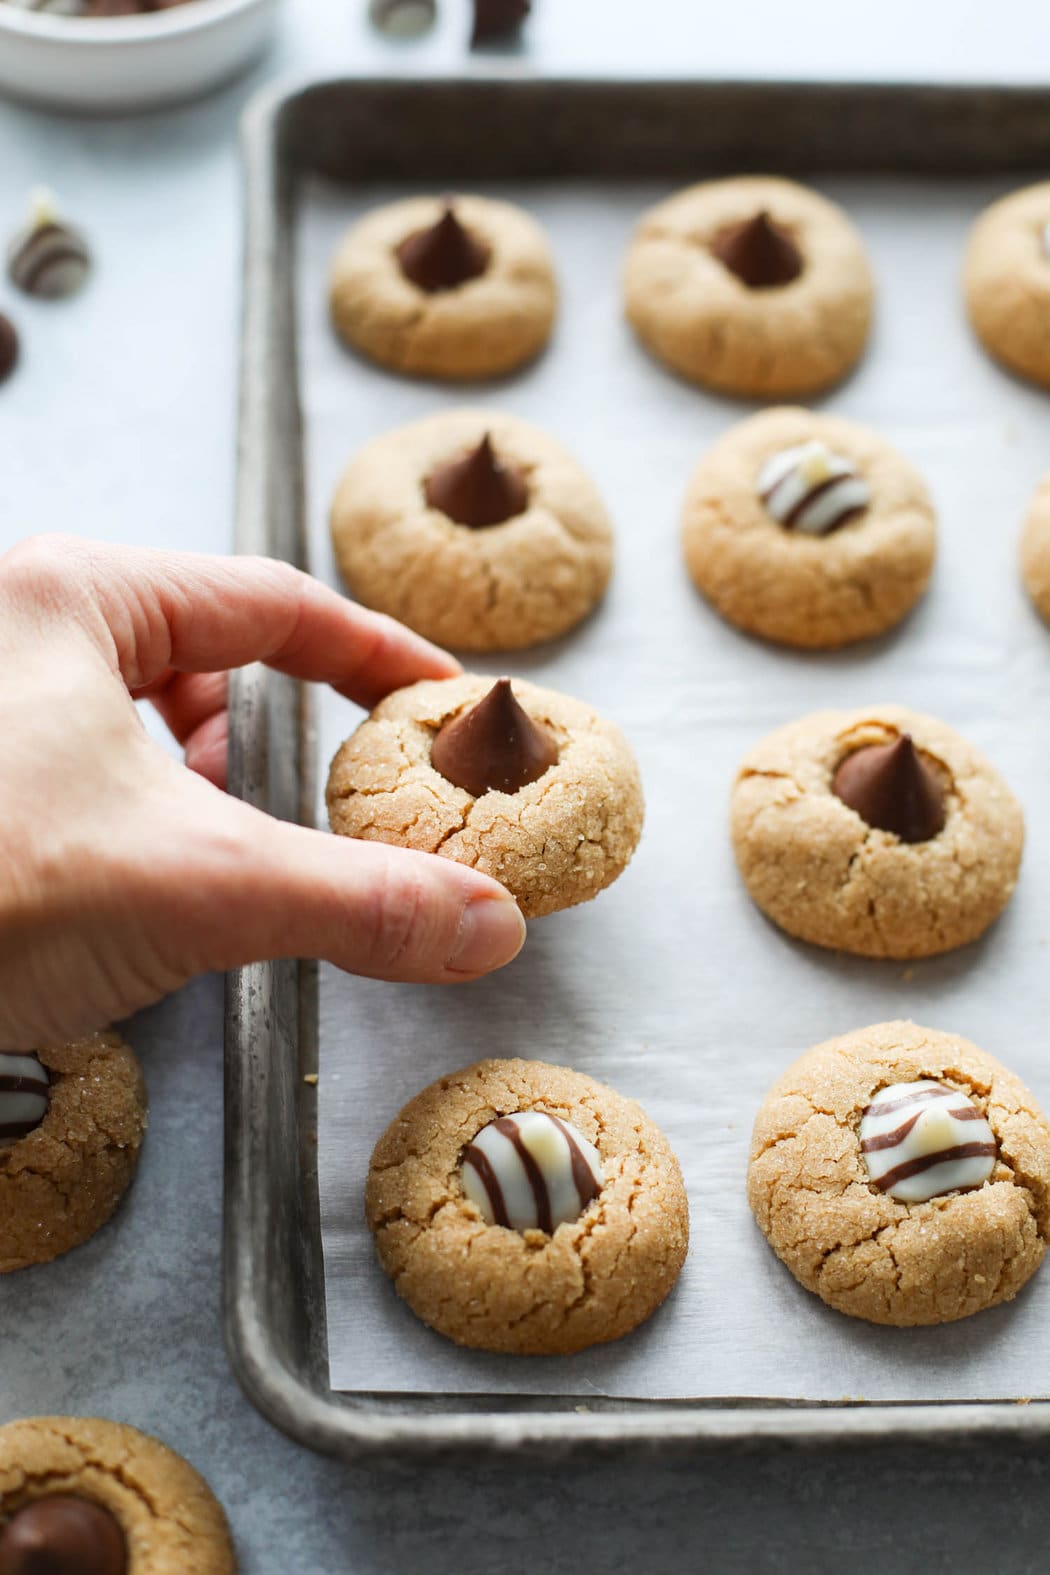 https://therealfooddietitians.com/wp-content/uploads/2022/12/Peanut-Blossom-Cookies-15-of-24.jpg